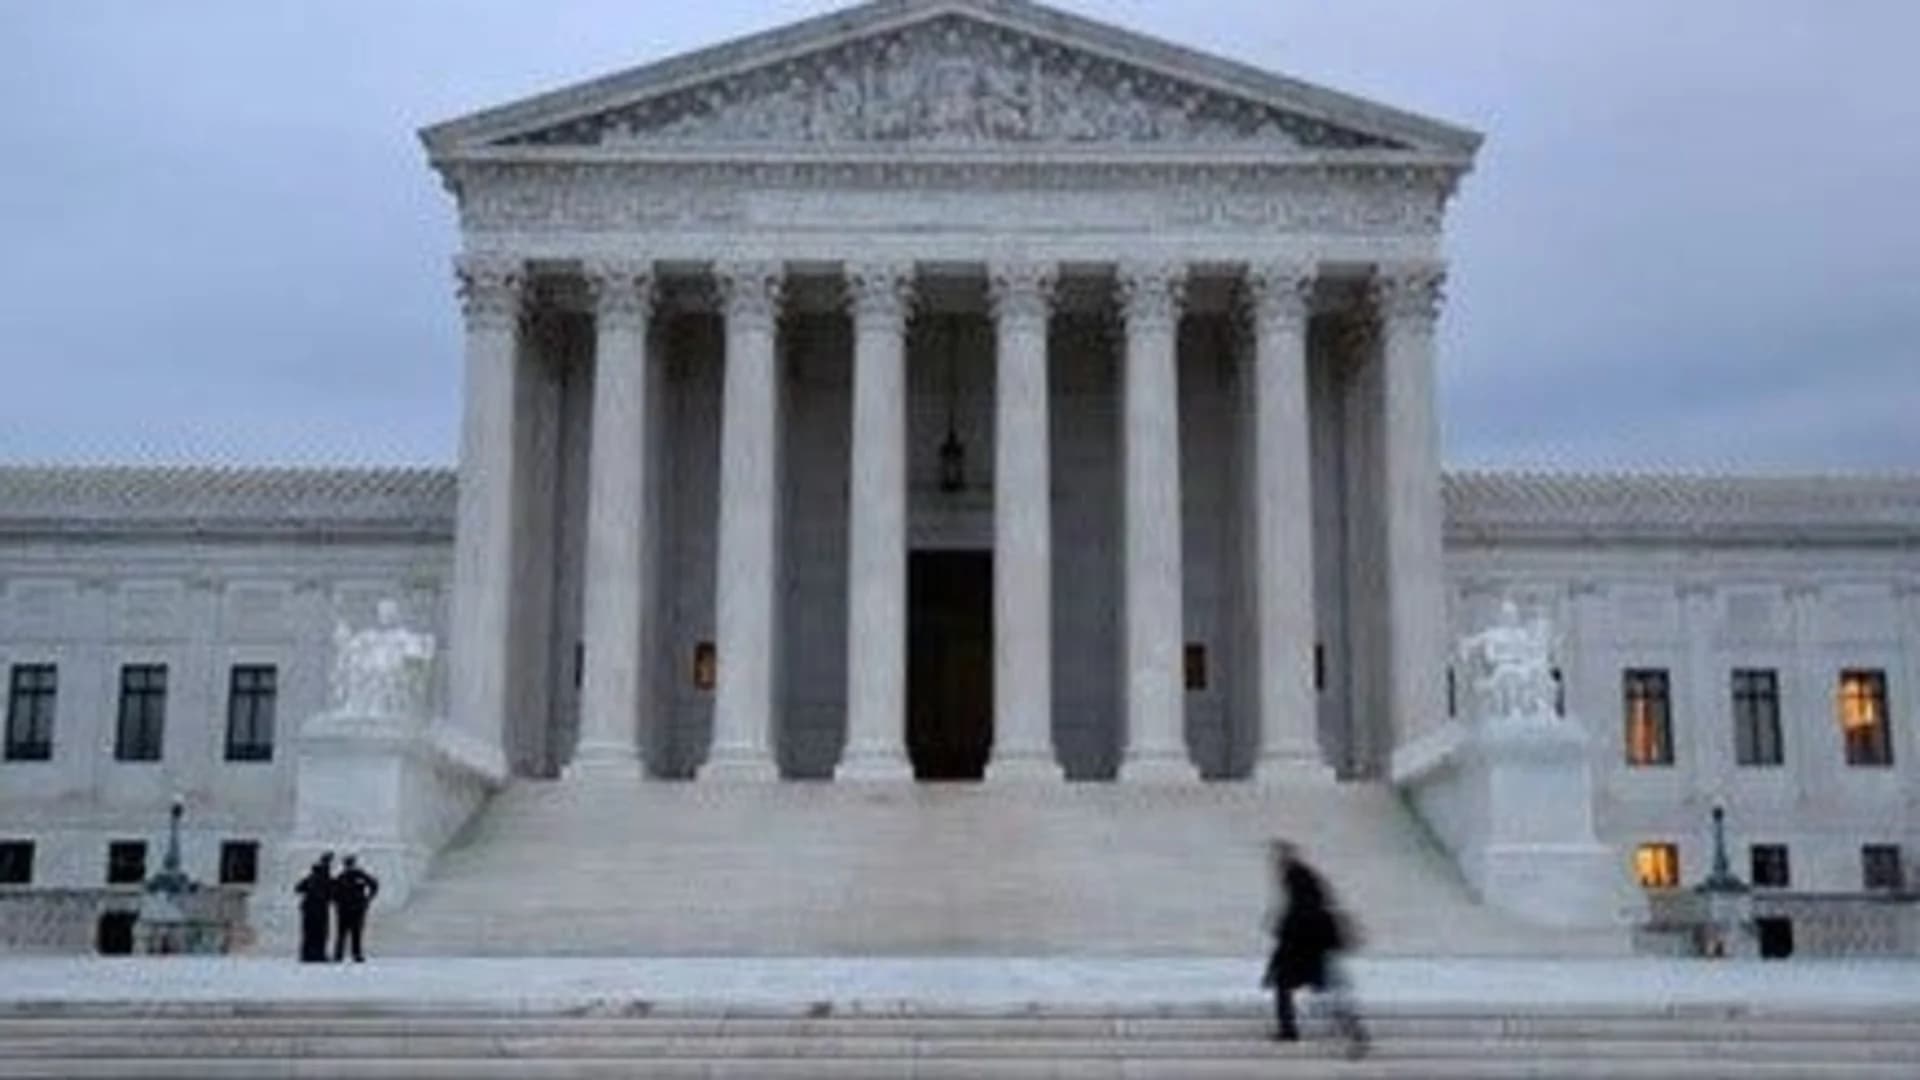 Not a final ruling, but justices OK travel ban enforcement